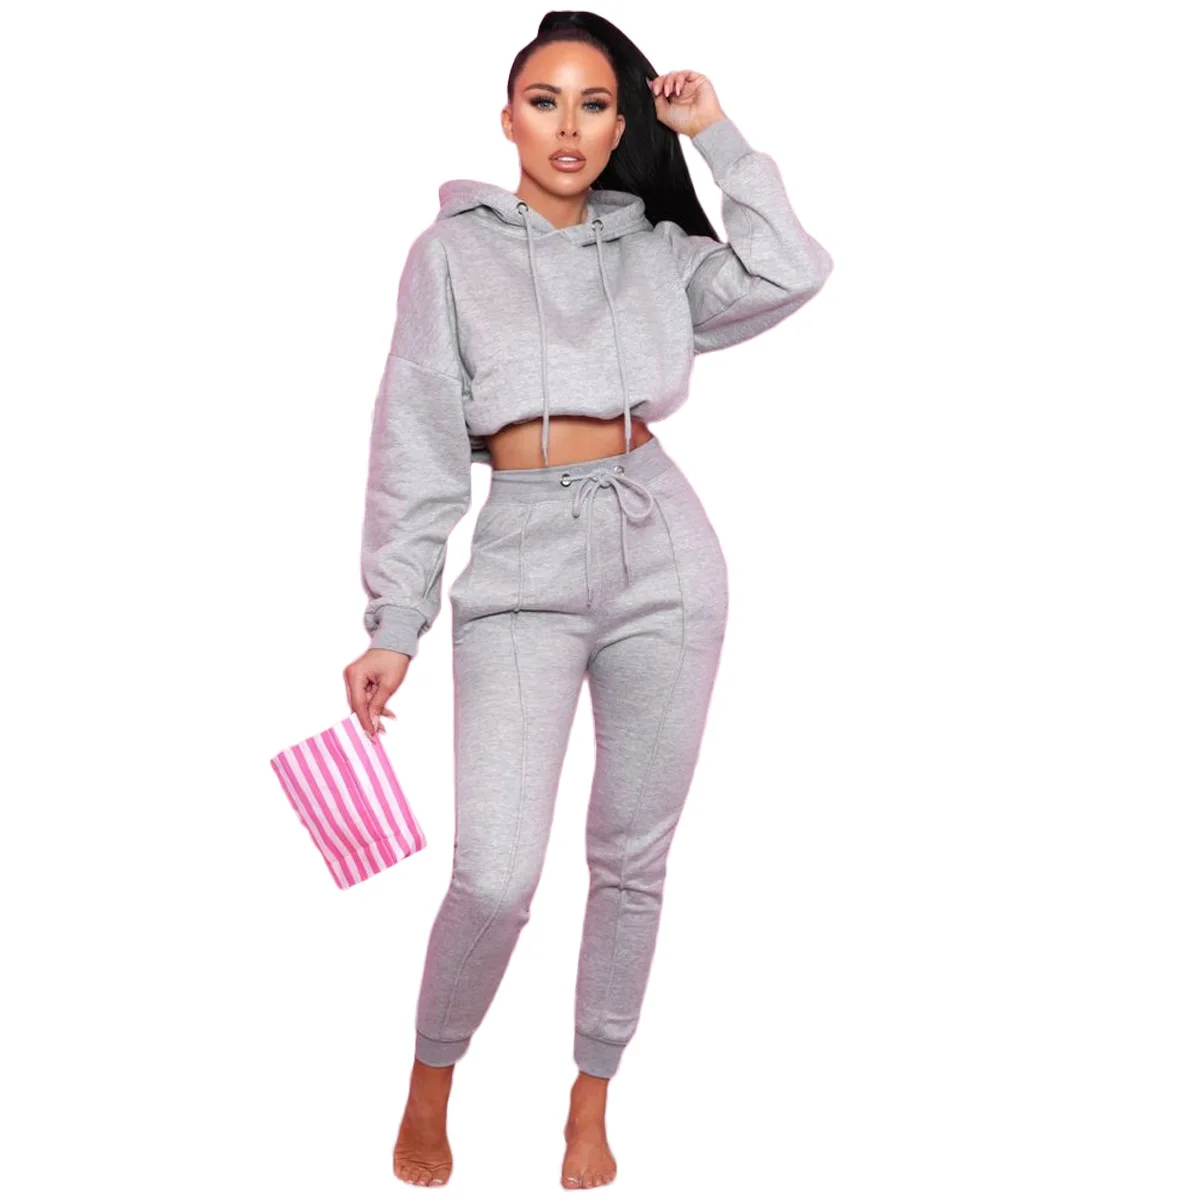 Solid color cropped hooded sweater elastic waist trousers sports two piece pants set